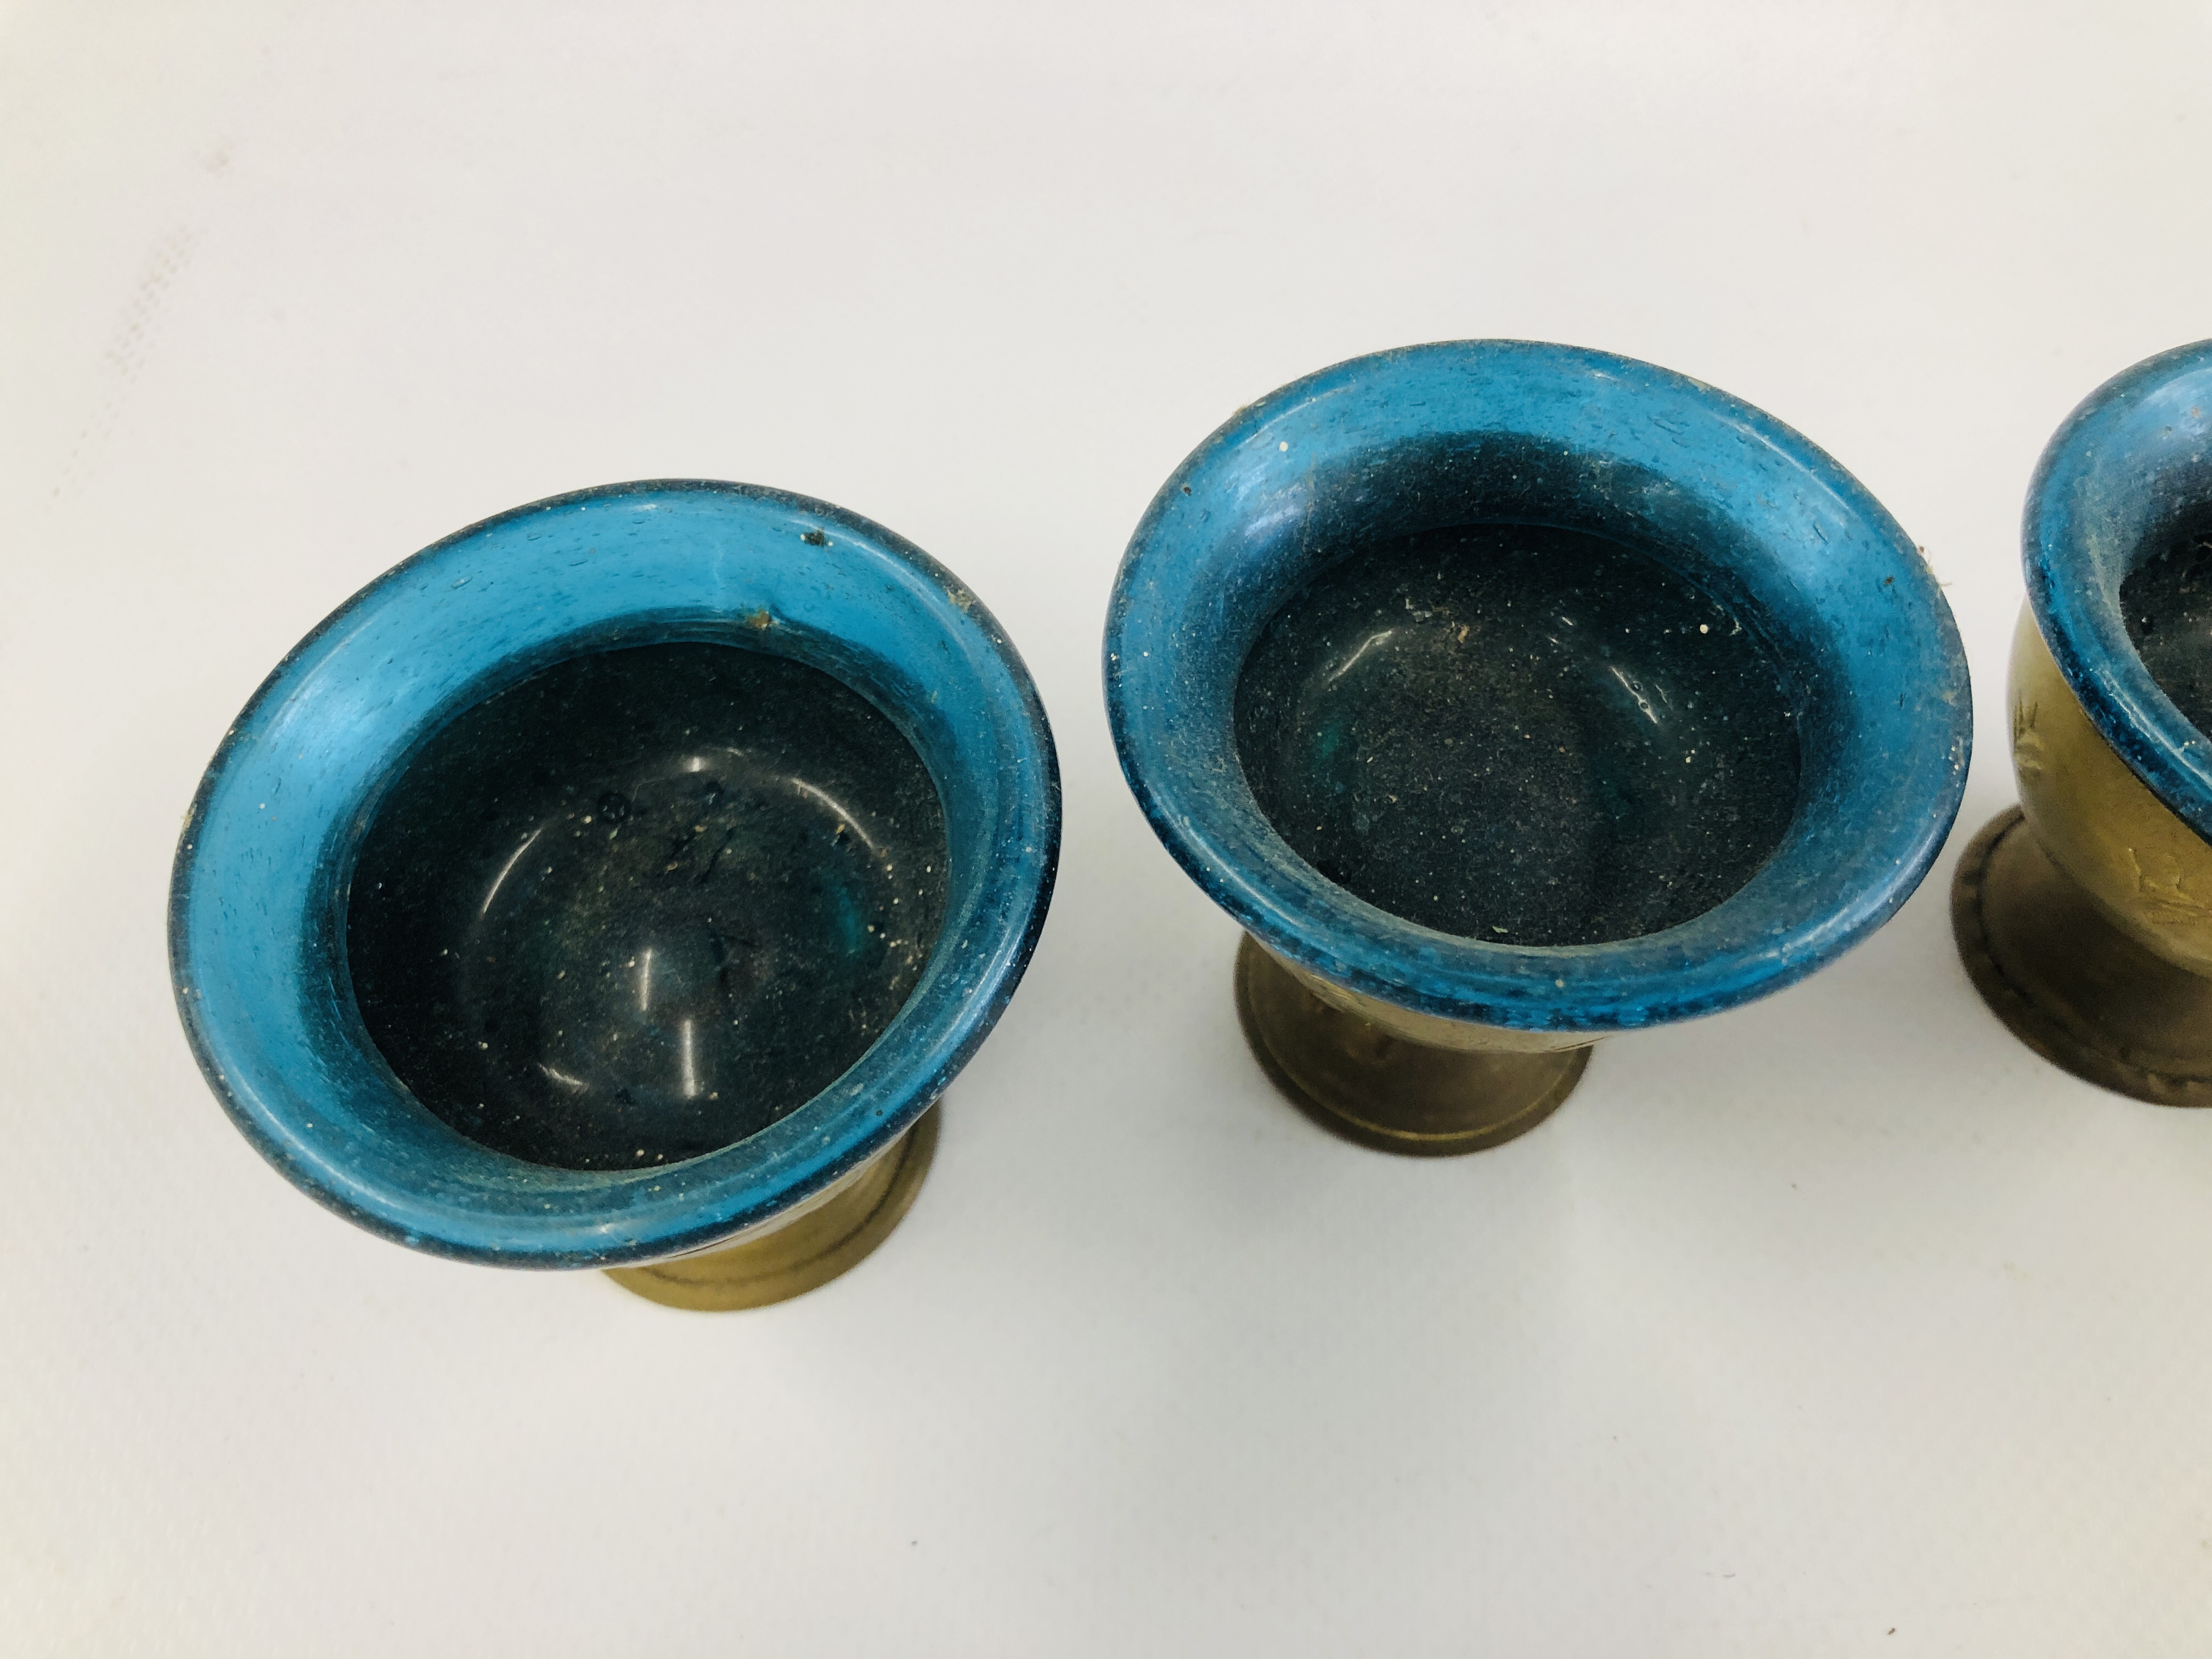 A SET OF SIX MIDDLE EASTERN BRASS GOBLET VESSELS WITH BLUE GLASS LINERS. - Image 7 of 11